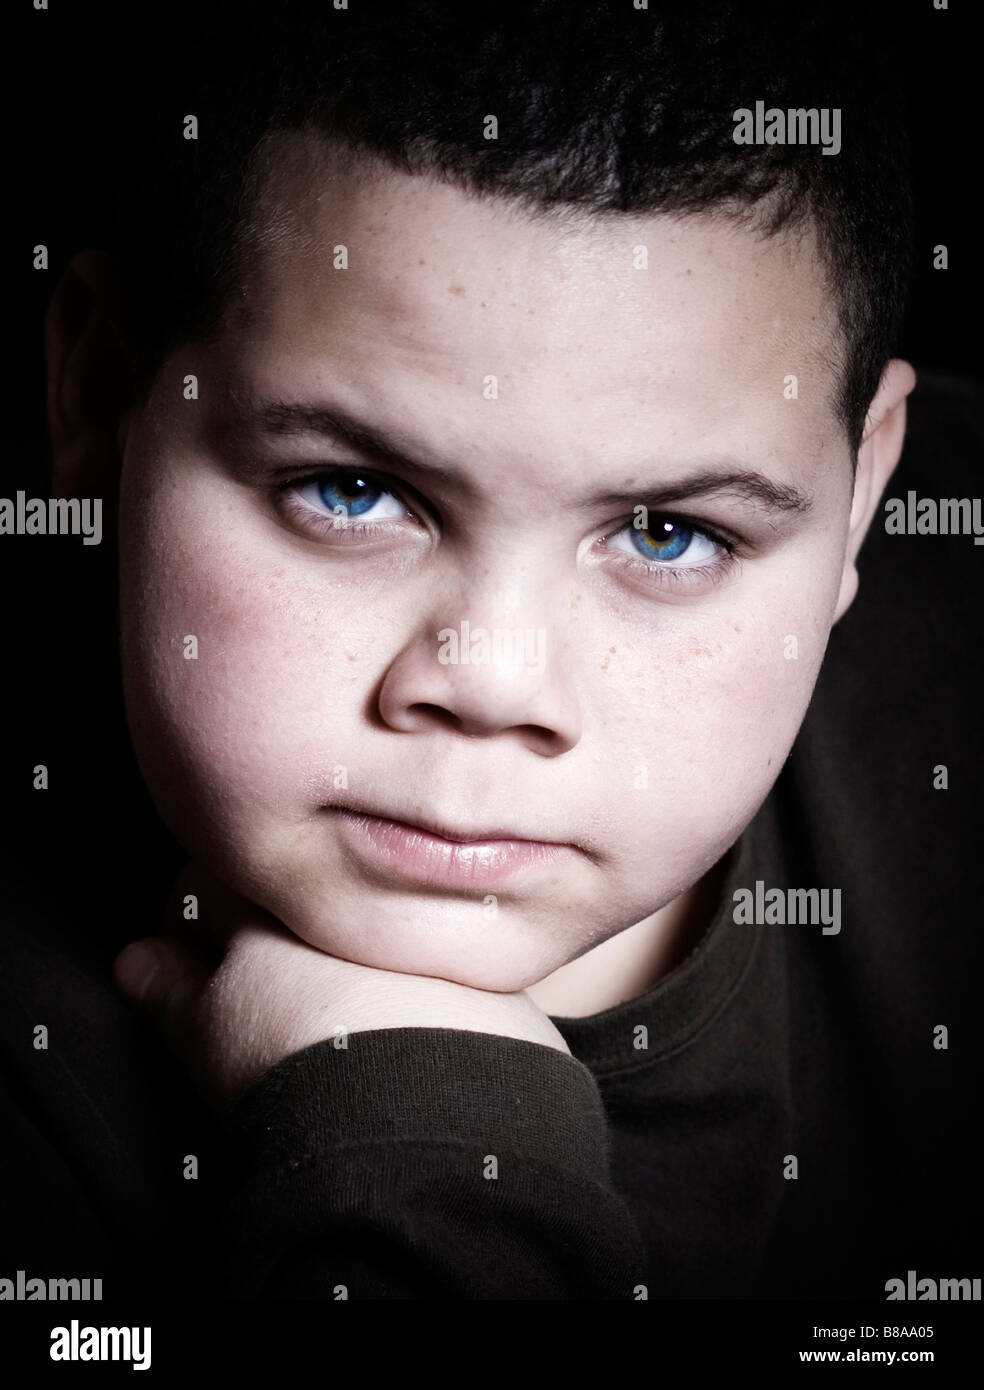 Teenage boy portrait staring at camera with intensity Stock Photo